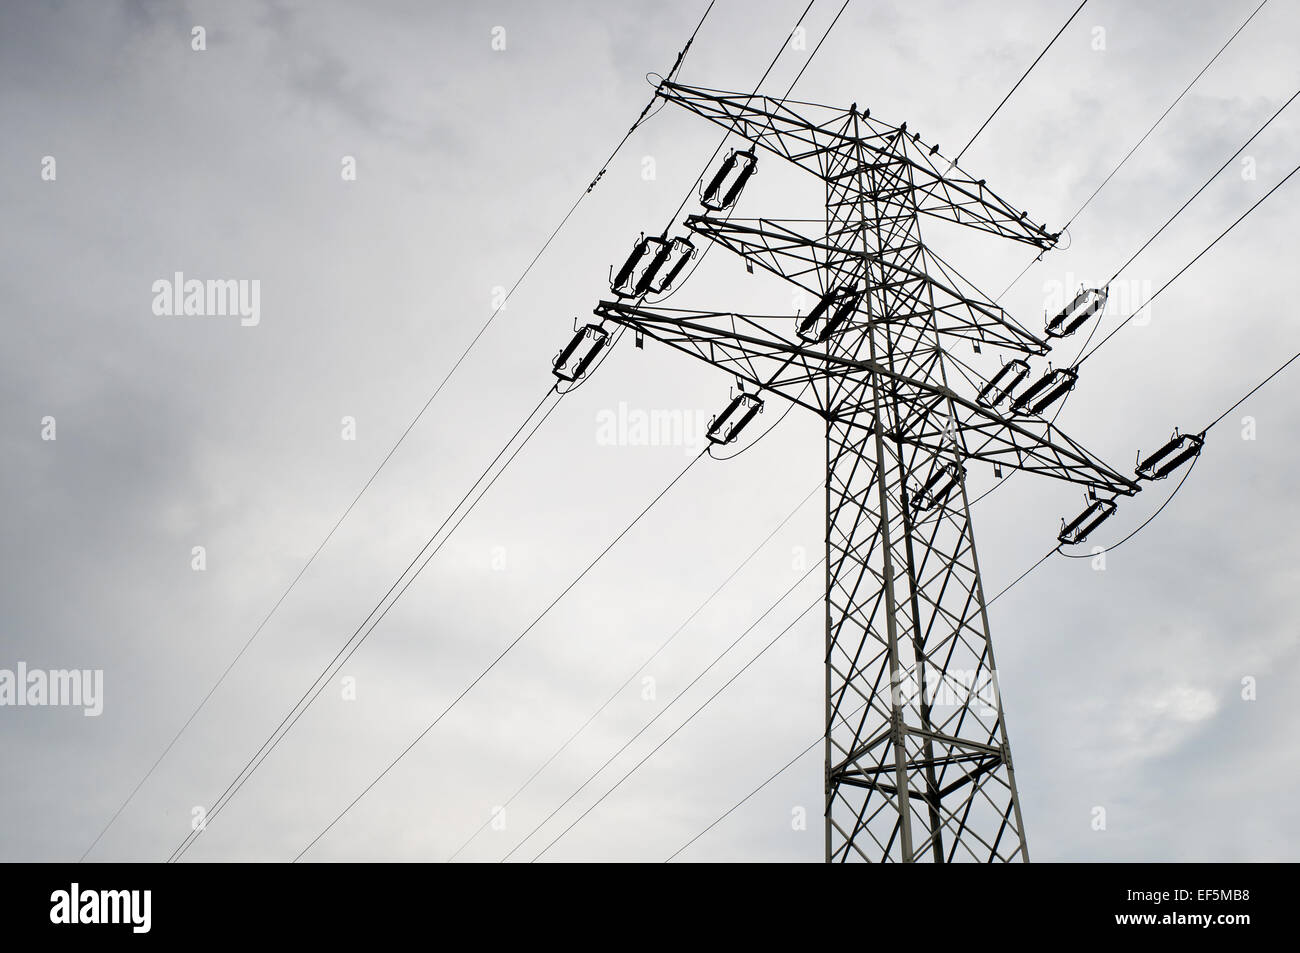 Electric power transmission or power grid pylon wires Stock Photo